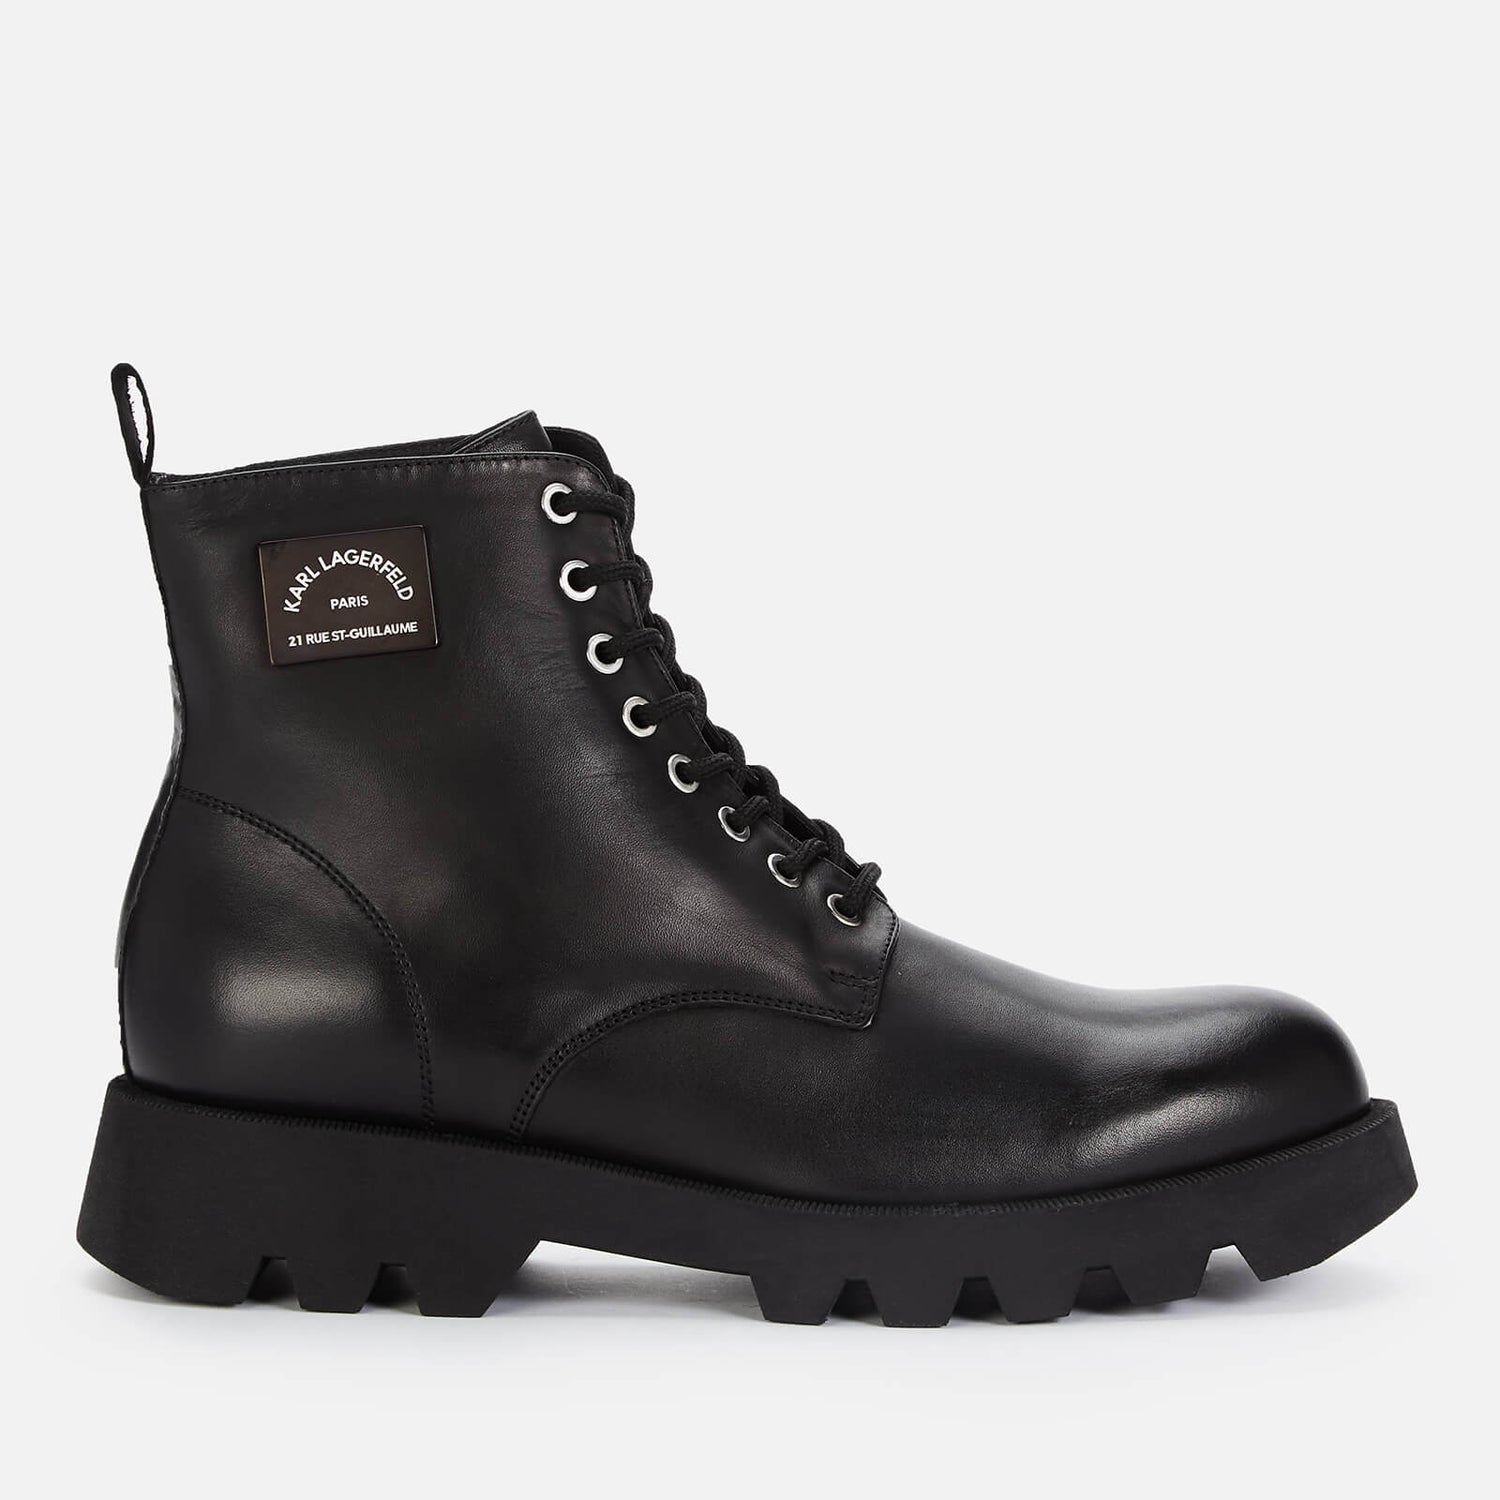 KARL LAGERFELD Men's Terra Firma Leather Lace Up Boots - Black | FREE ...